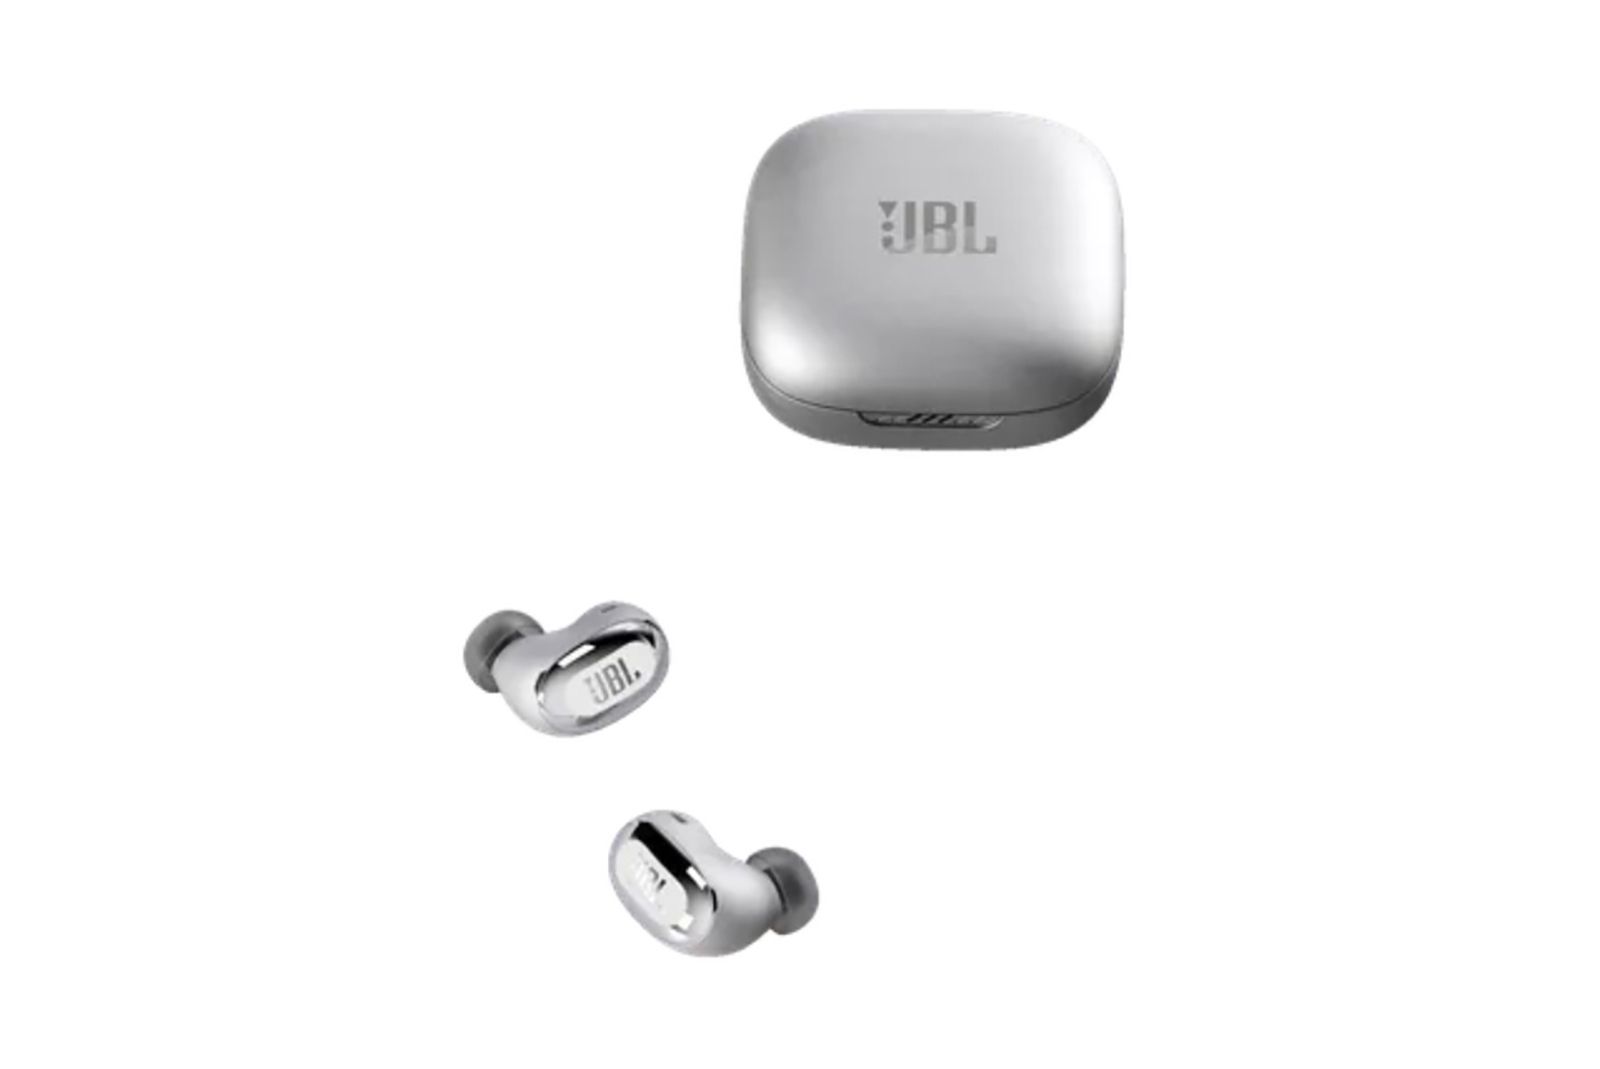 JBL rolls out several Bluetooth speakers and wireless earbuds at CES 2022 photo 6